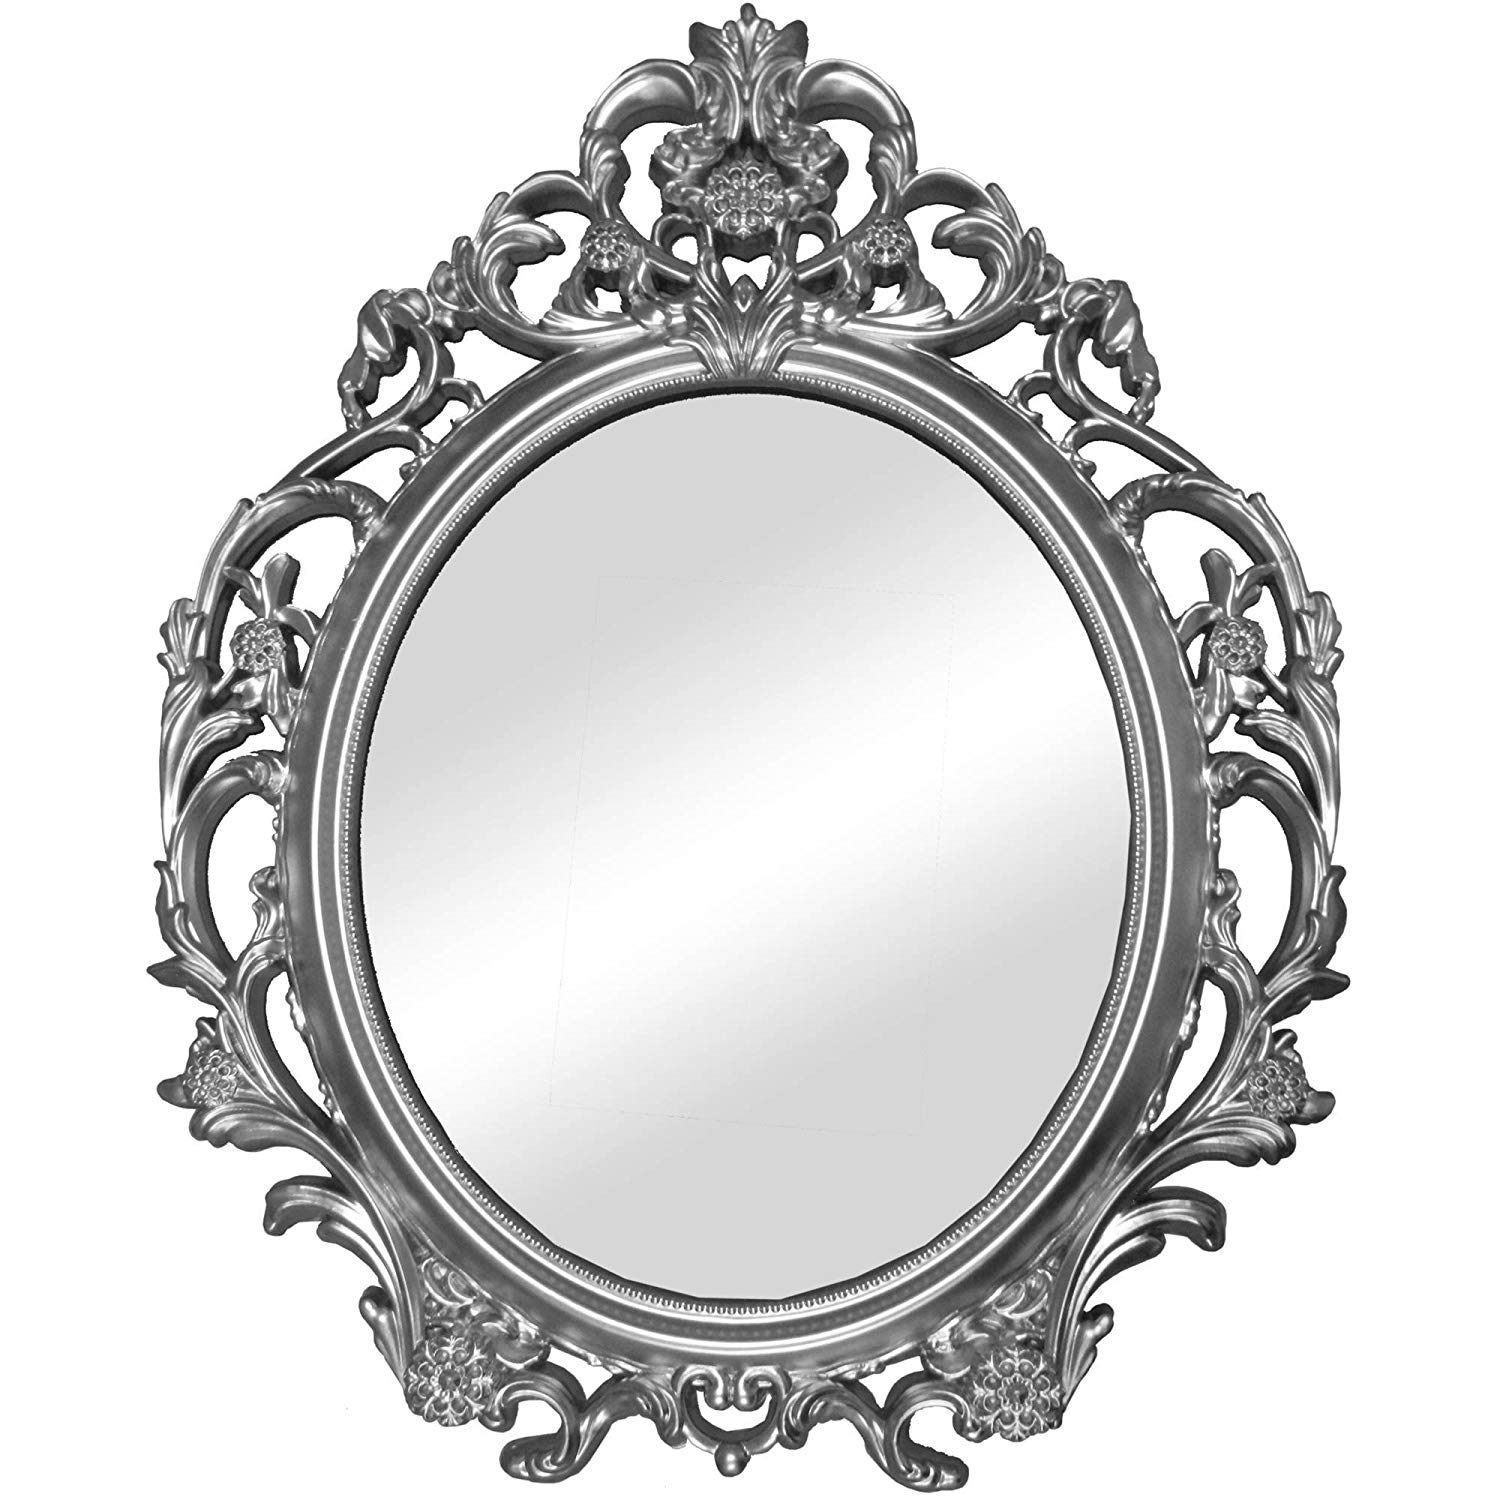 Vintage Mirror Drawing | Free download on ClipArtMag